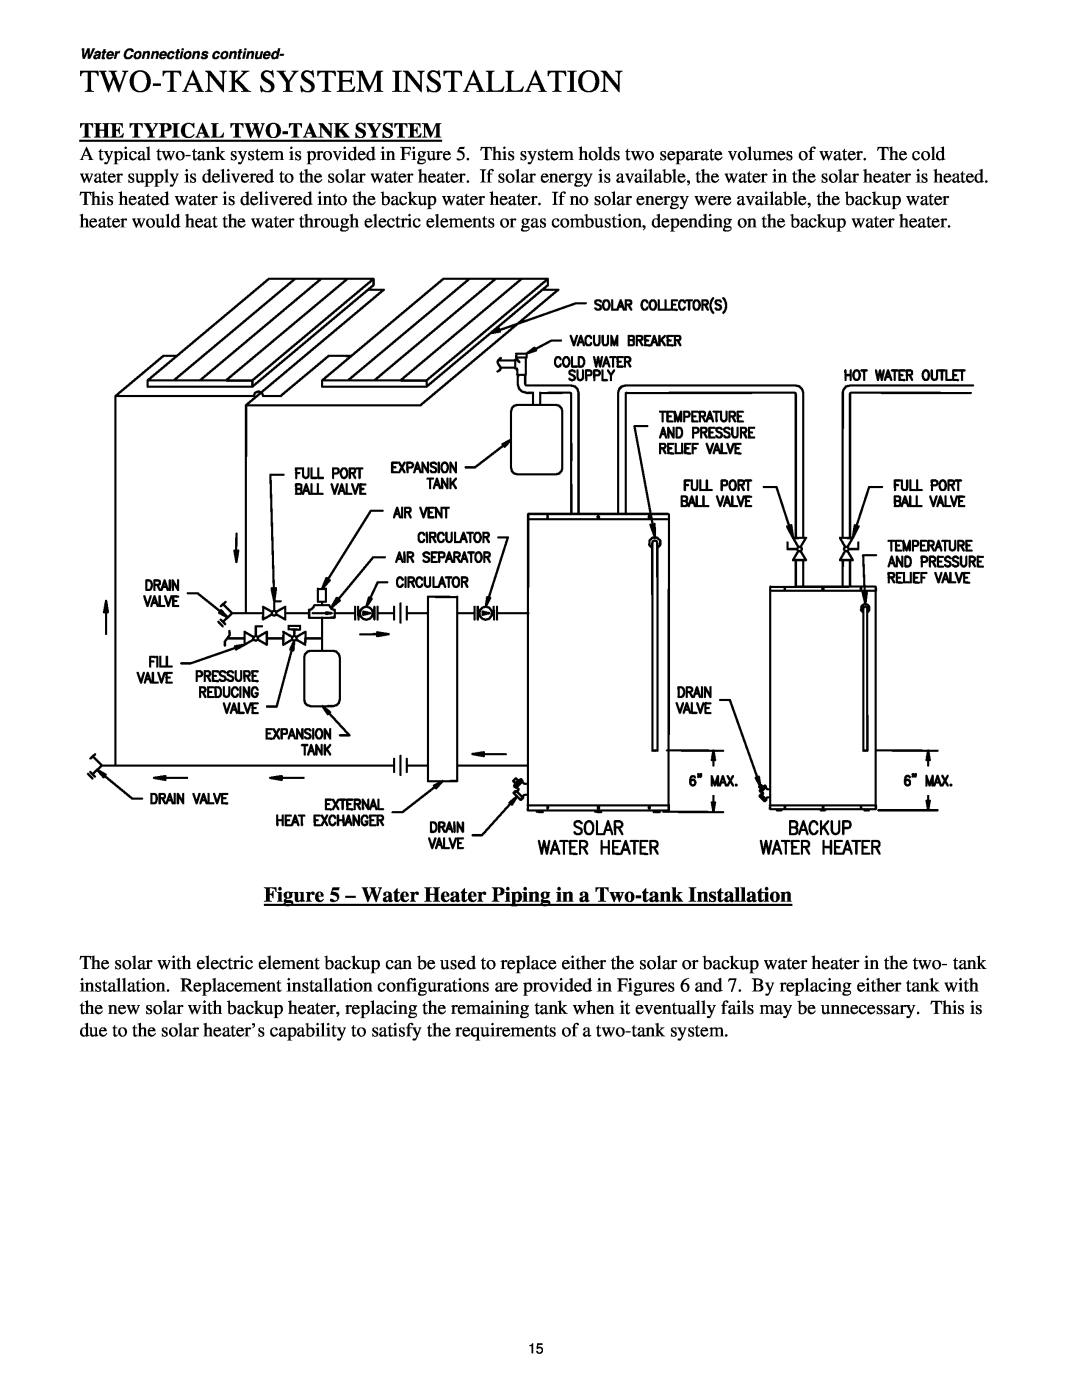 Bradford-White Corp Solar Water Heater manual Two-Tank System Installation, The Typical Two-Tank System 